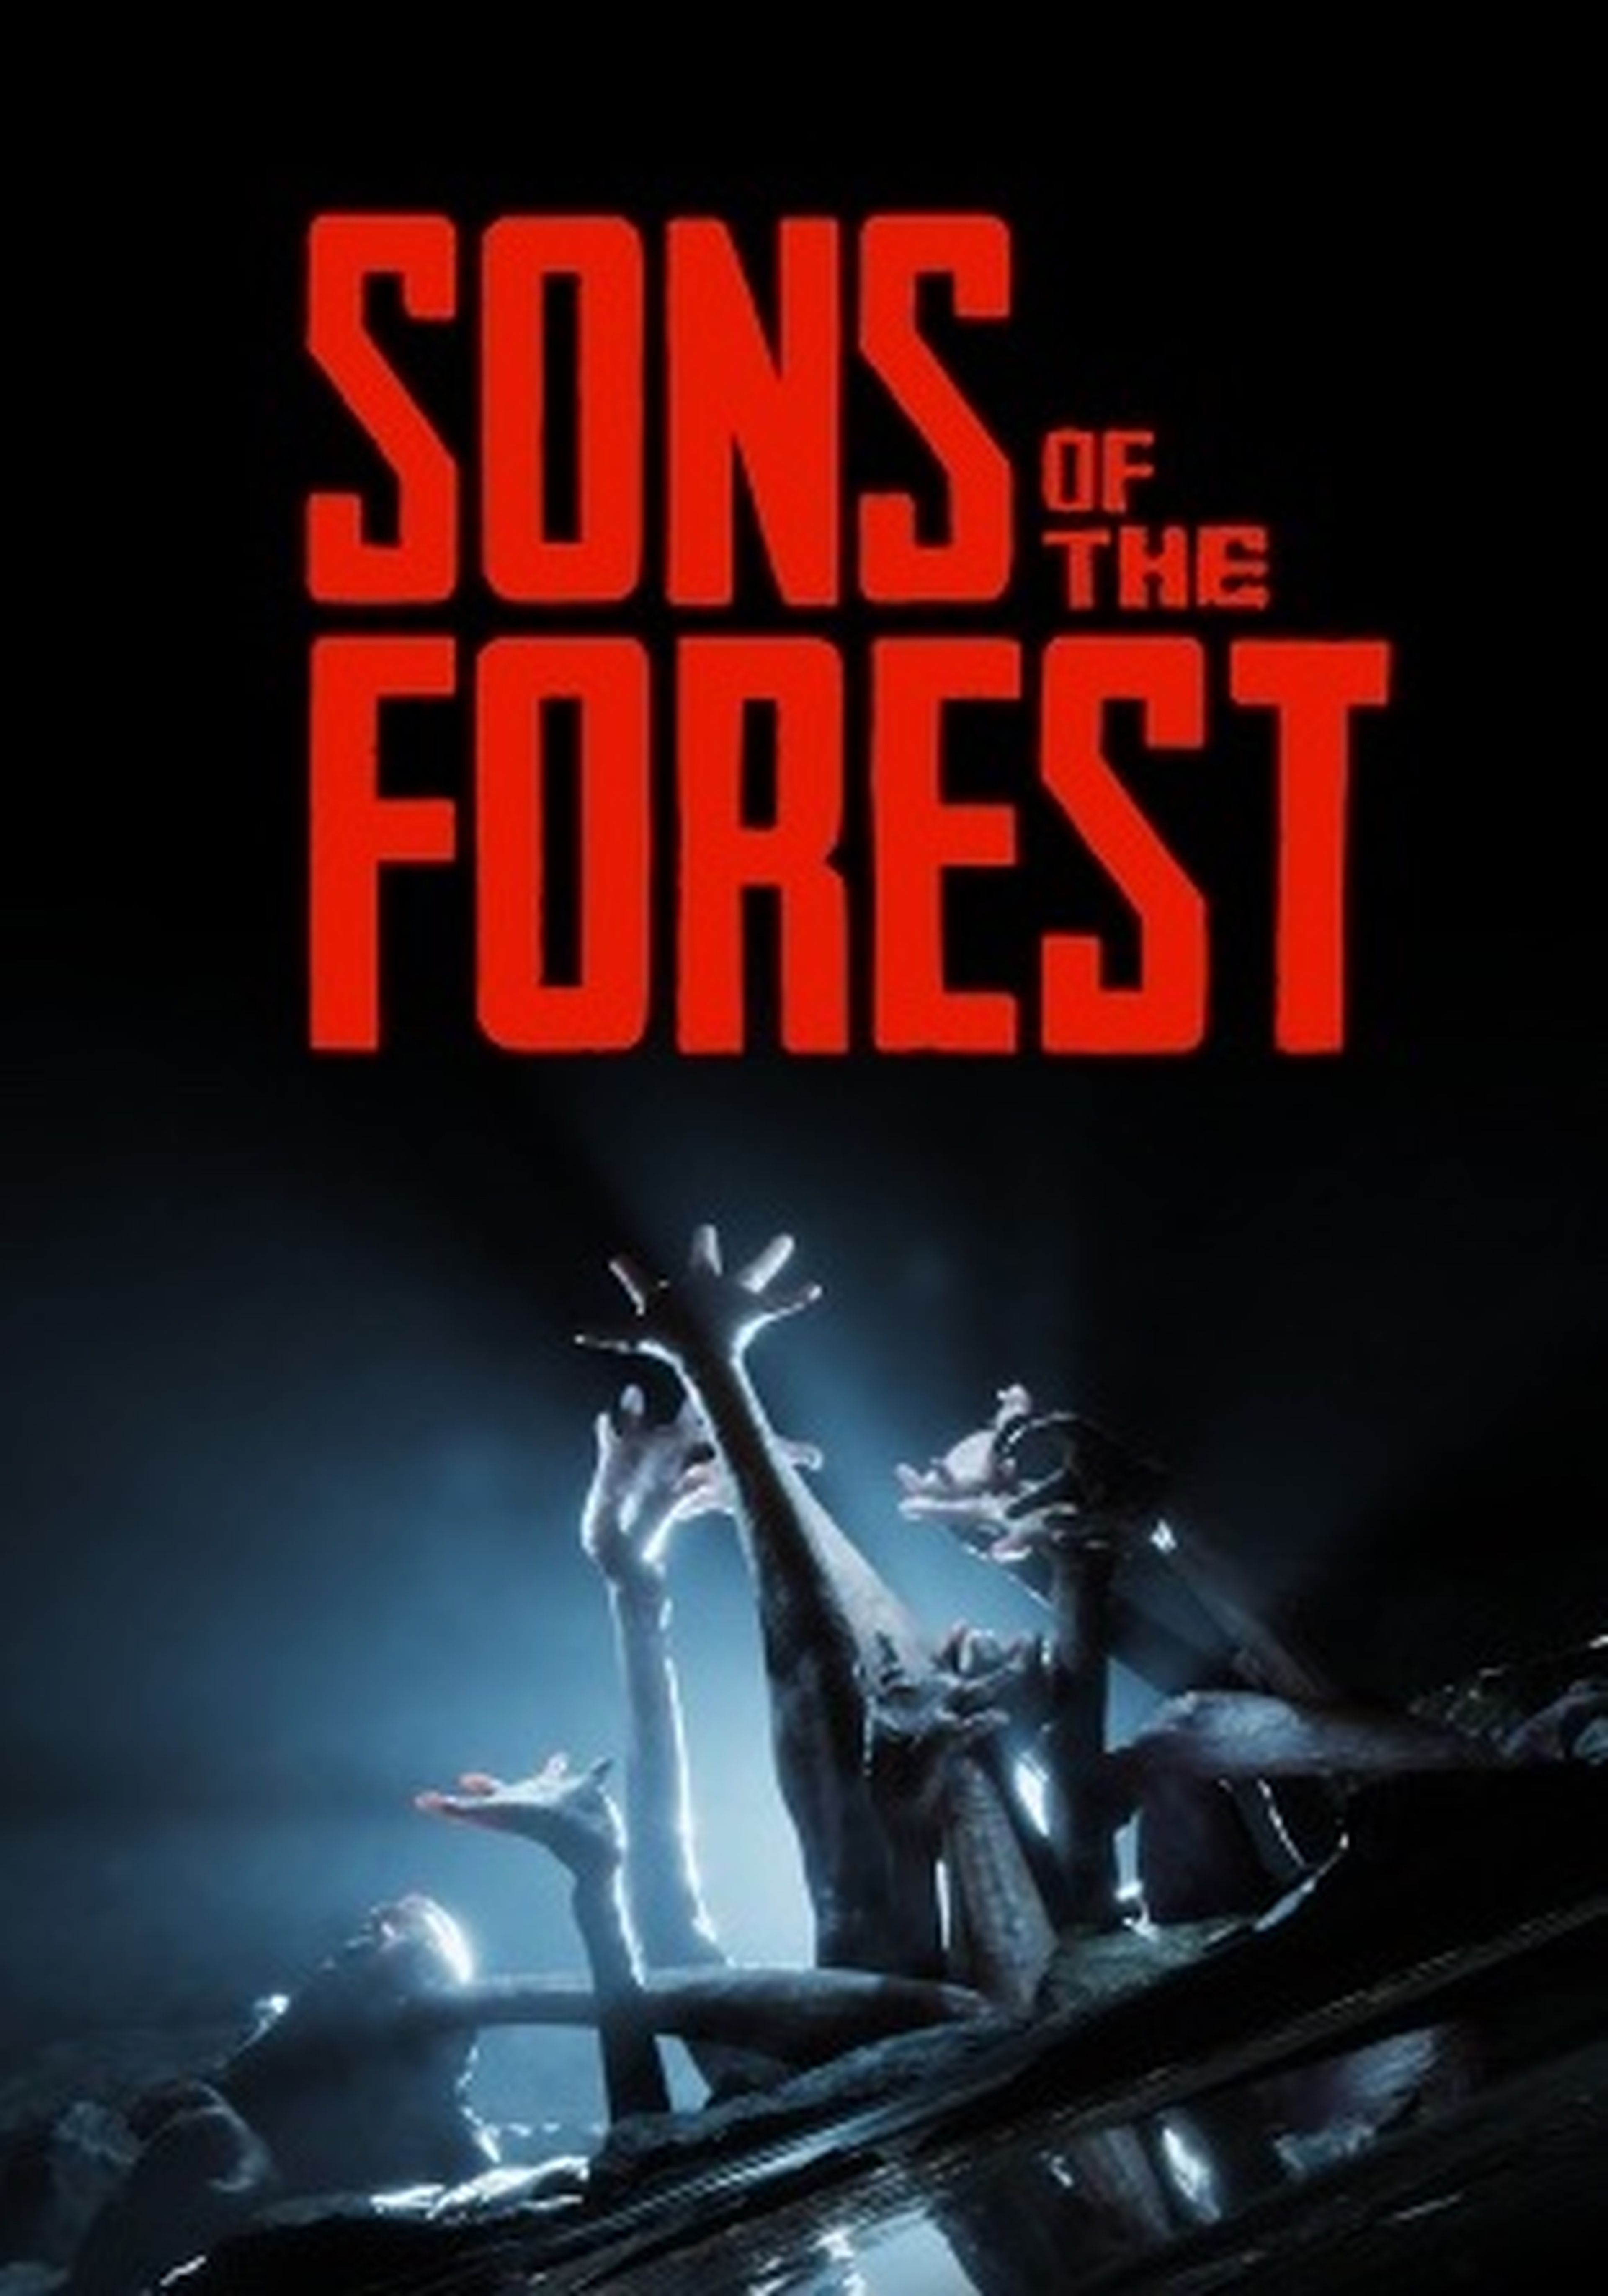 THE FOREST 2 - TRAILER DE LA SECUELA - SONS OF THE FOREST 